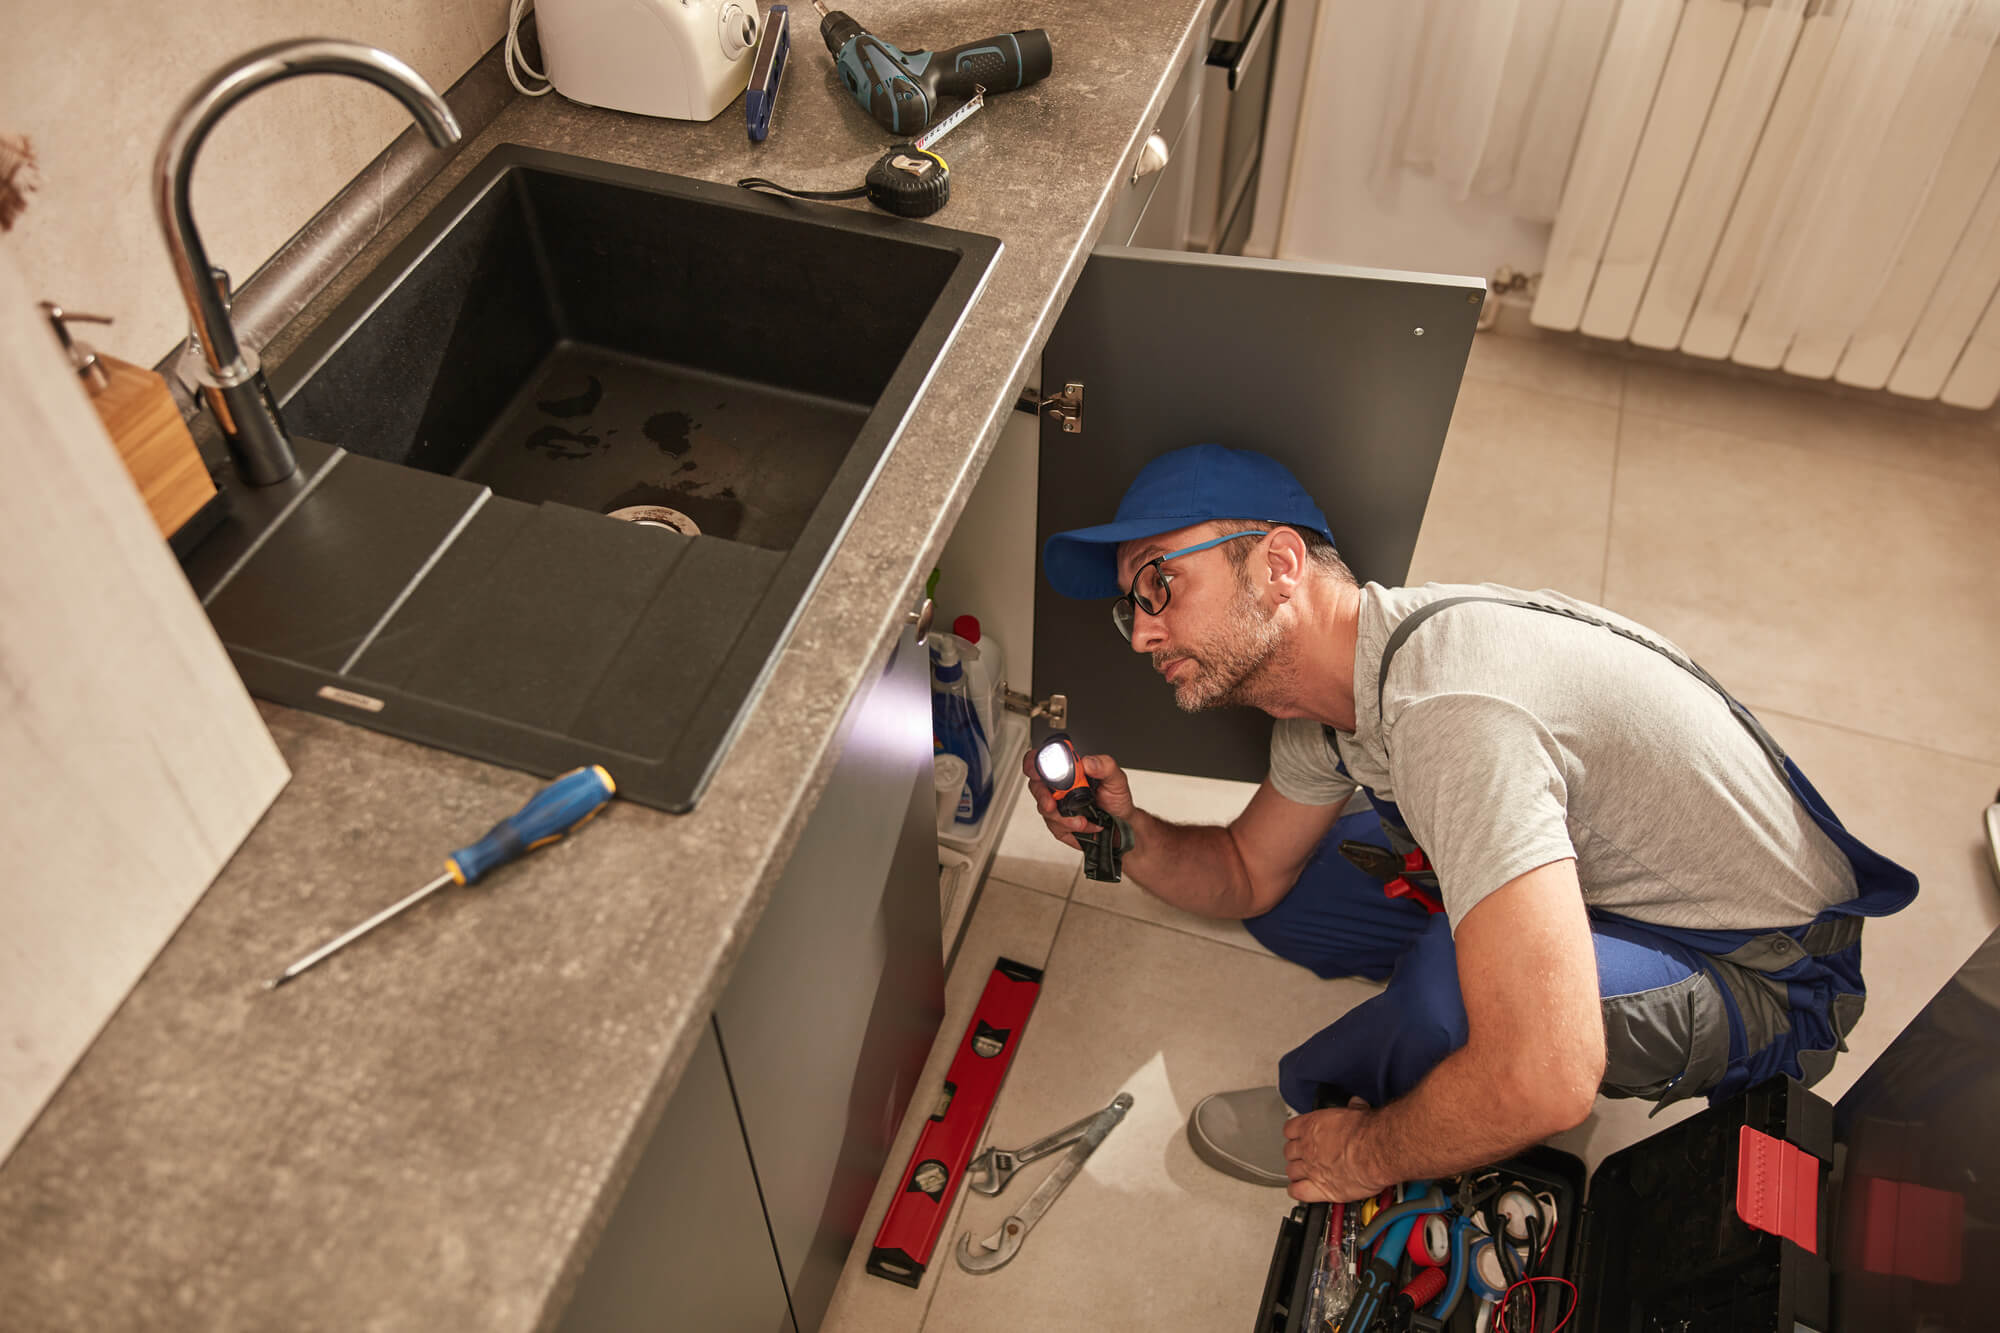 Plumber fixing and repairing water pipes under the kitchen sink.